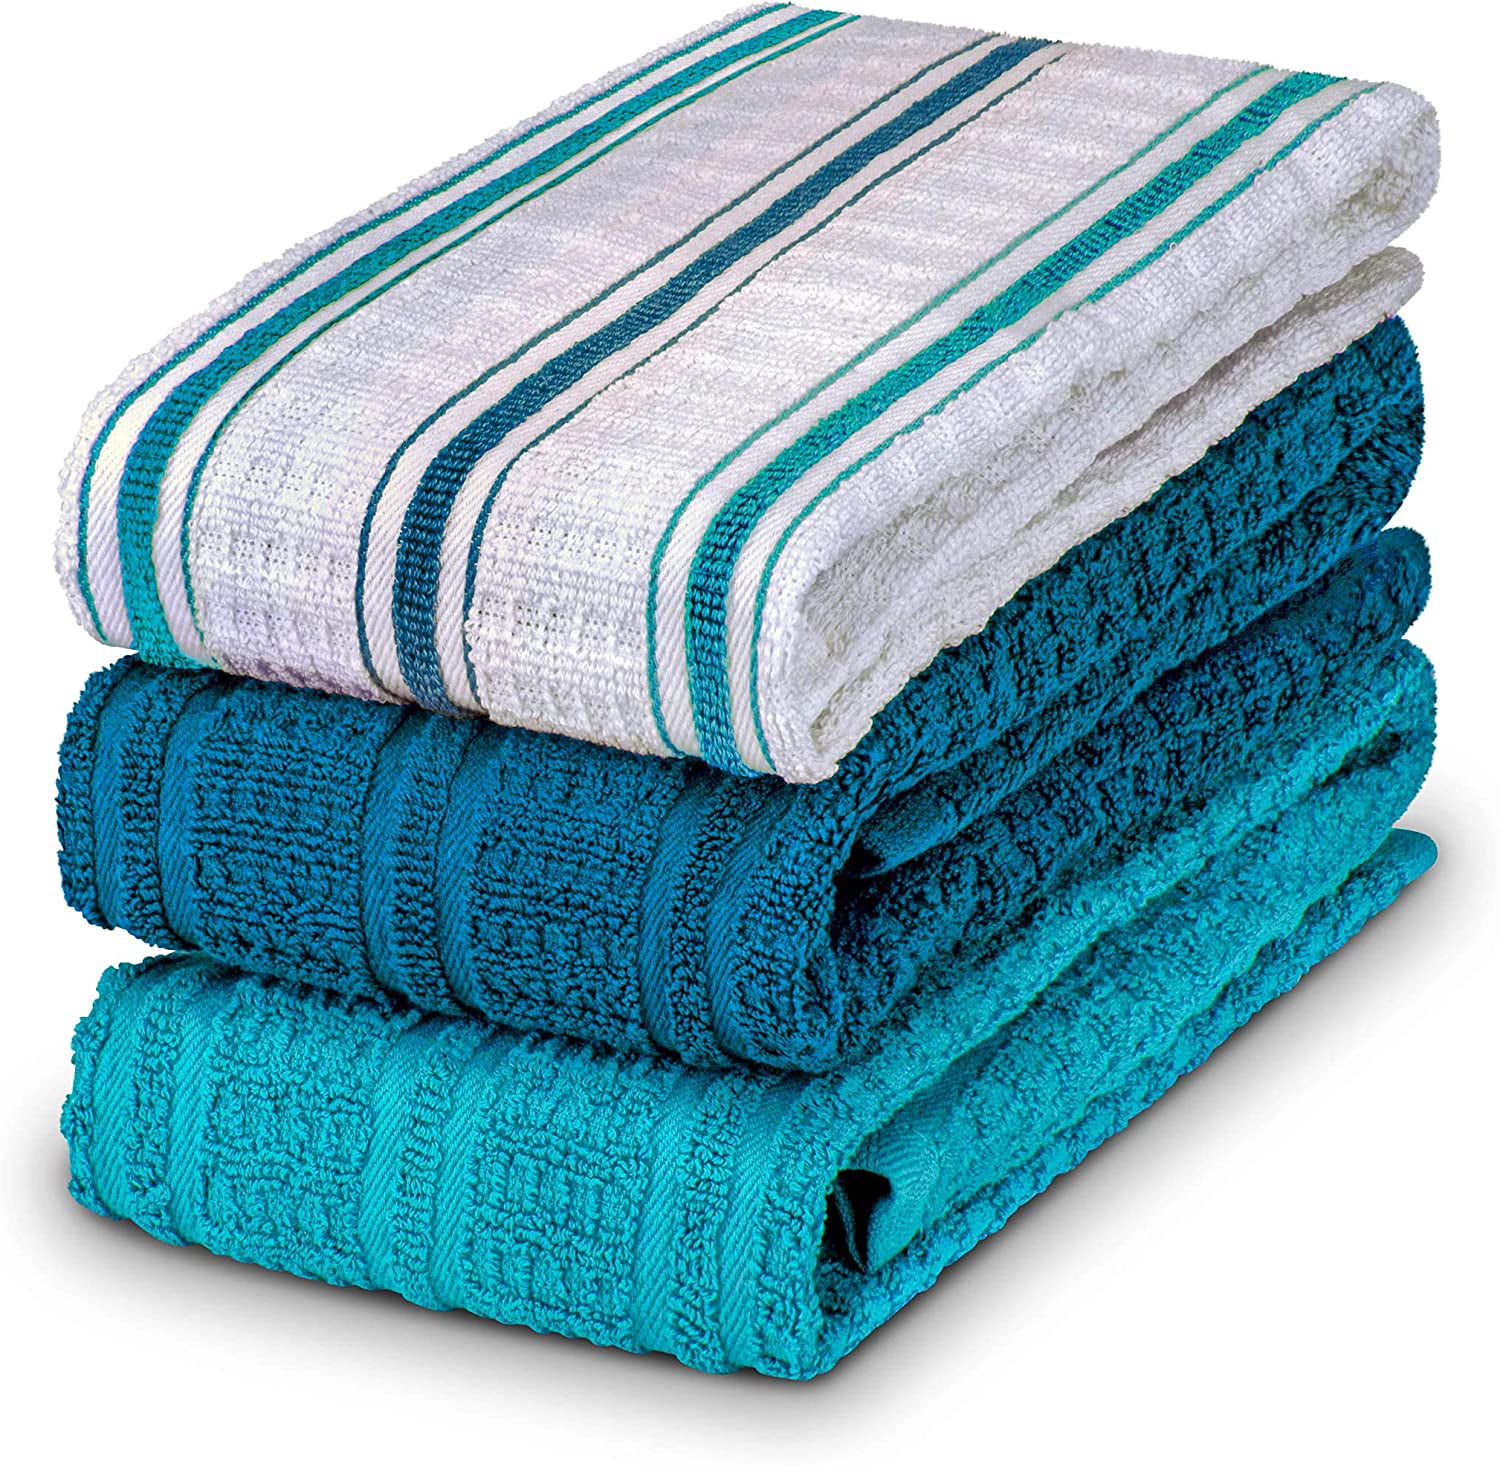 Onam Kitchen Towels - Blue  Navy Modern Towels Handmade in India – The  Citizenry